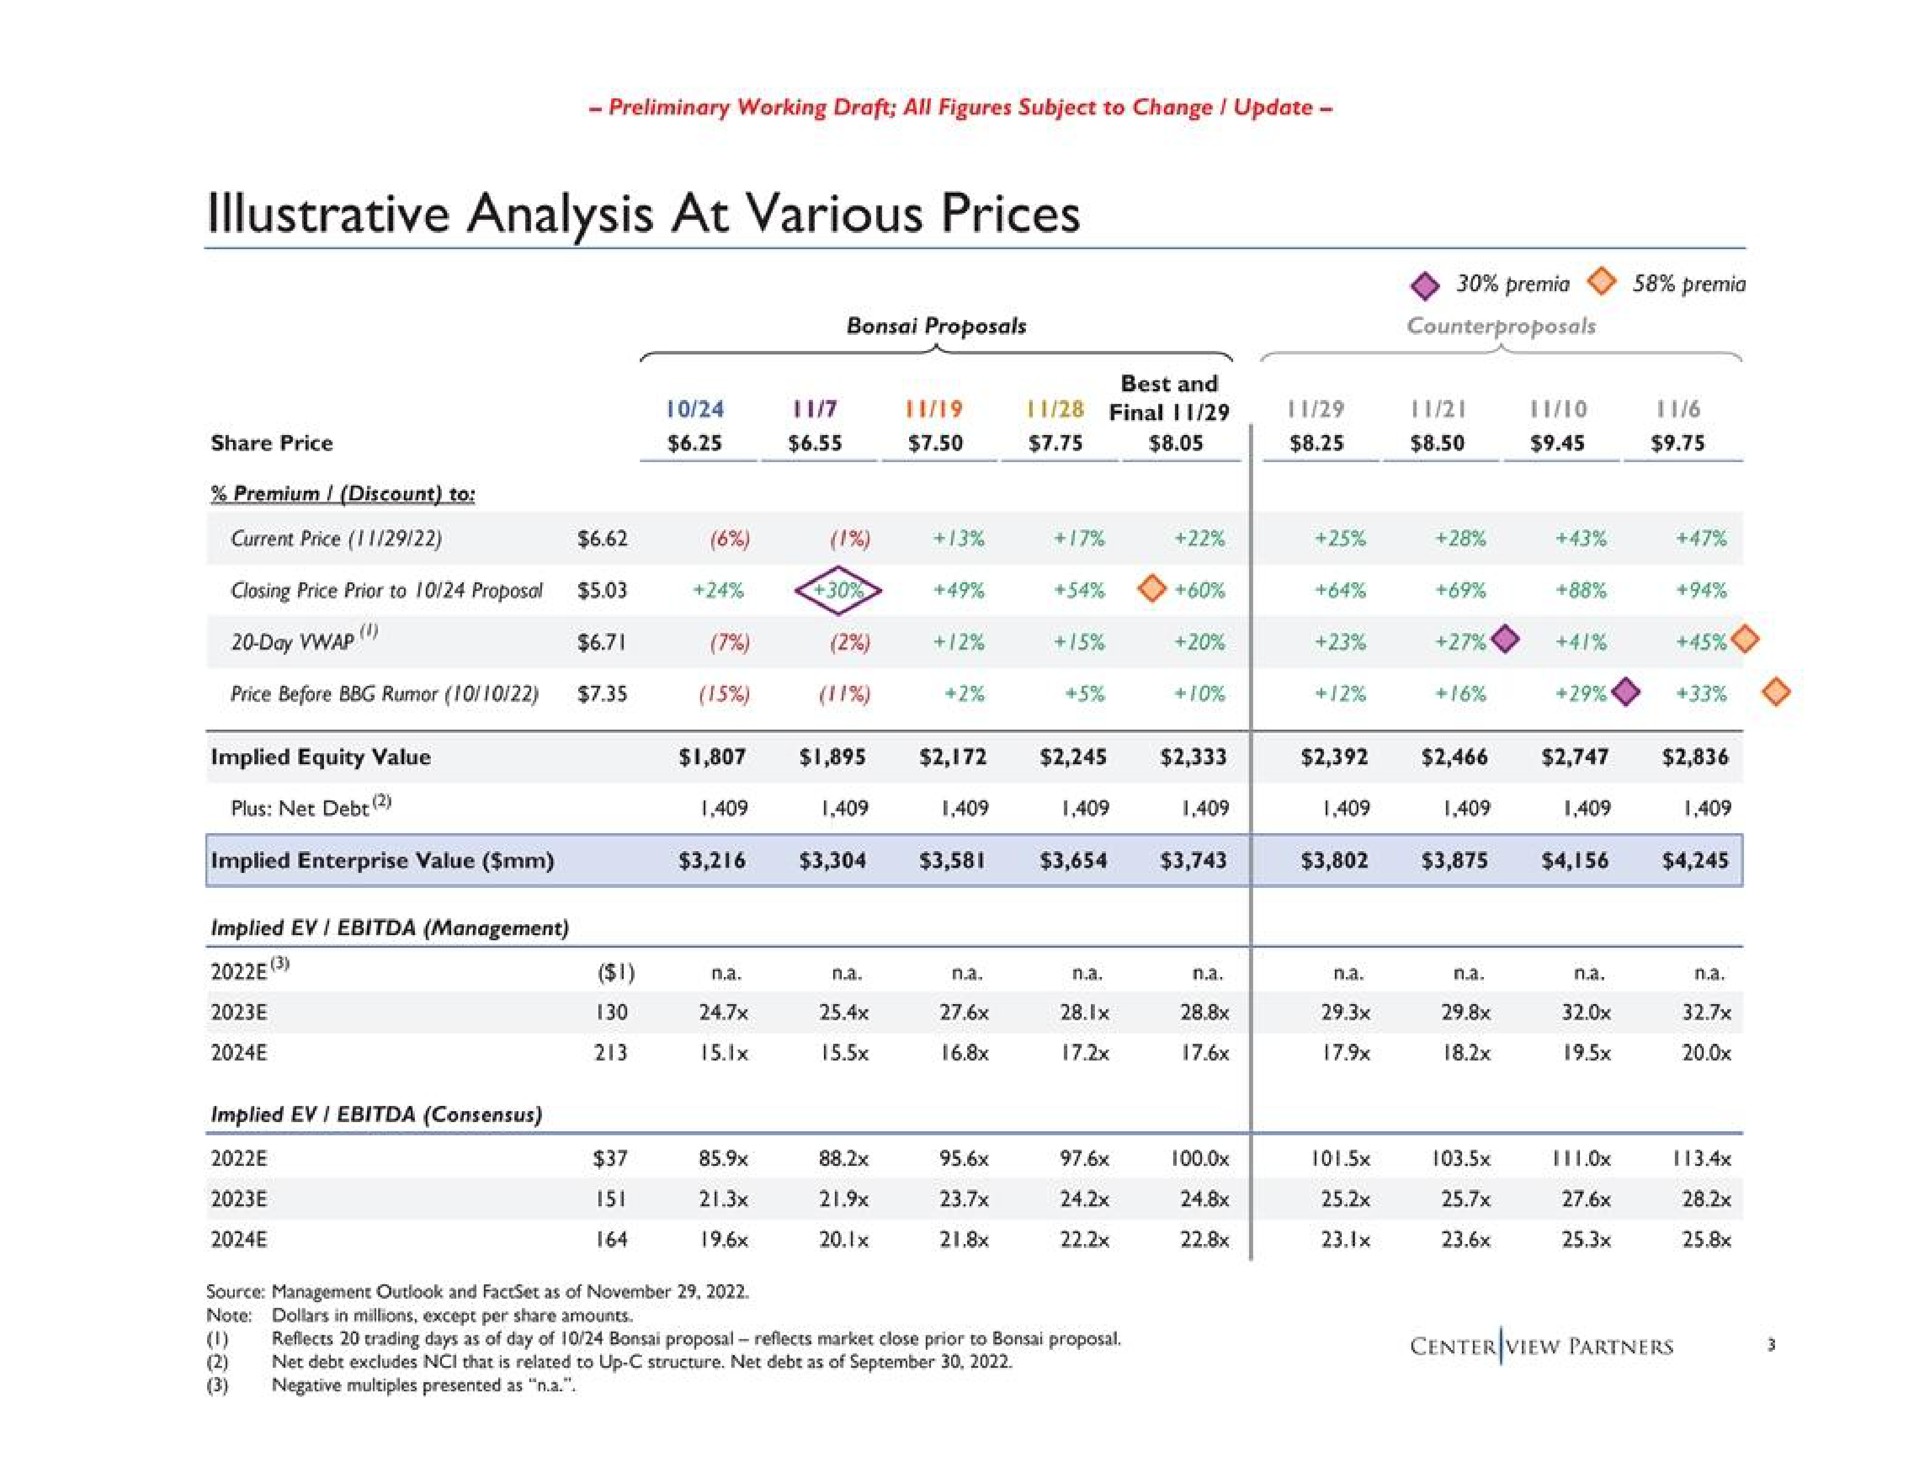 illustrative analysis at various prices | Centerview Partners